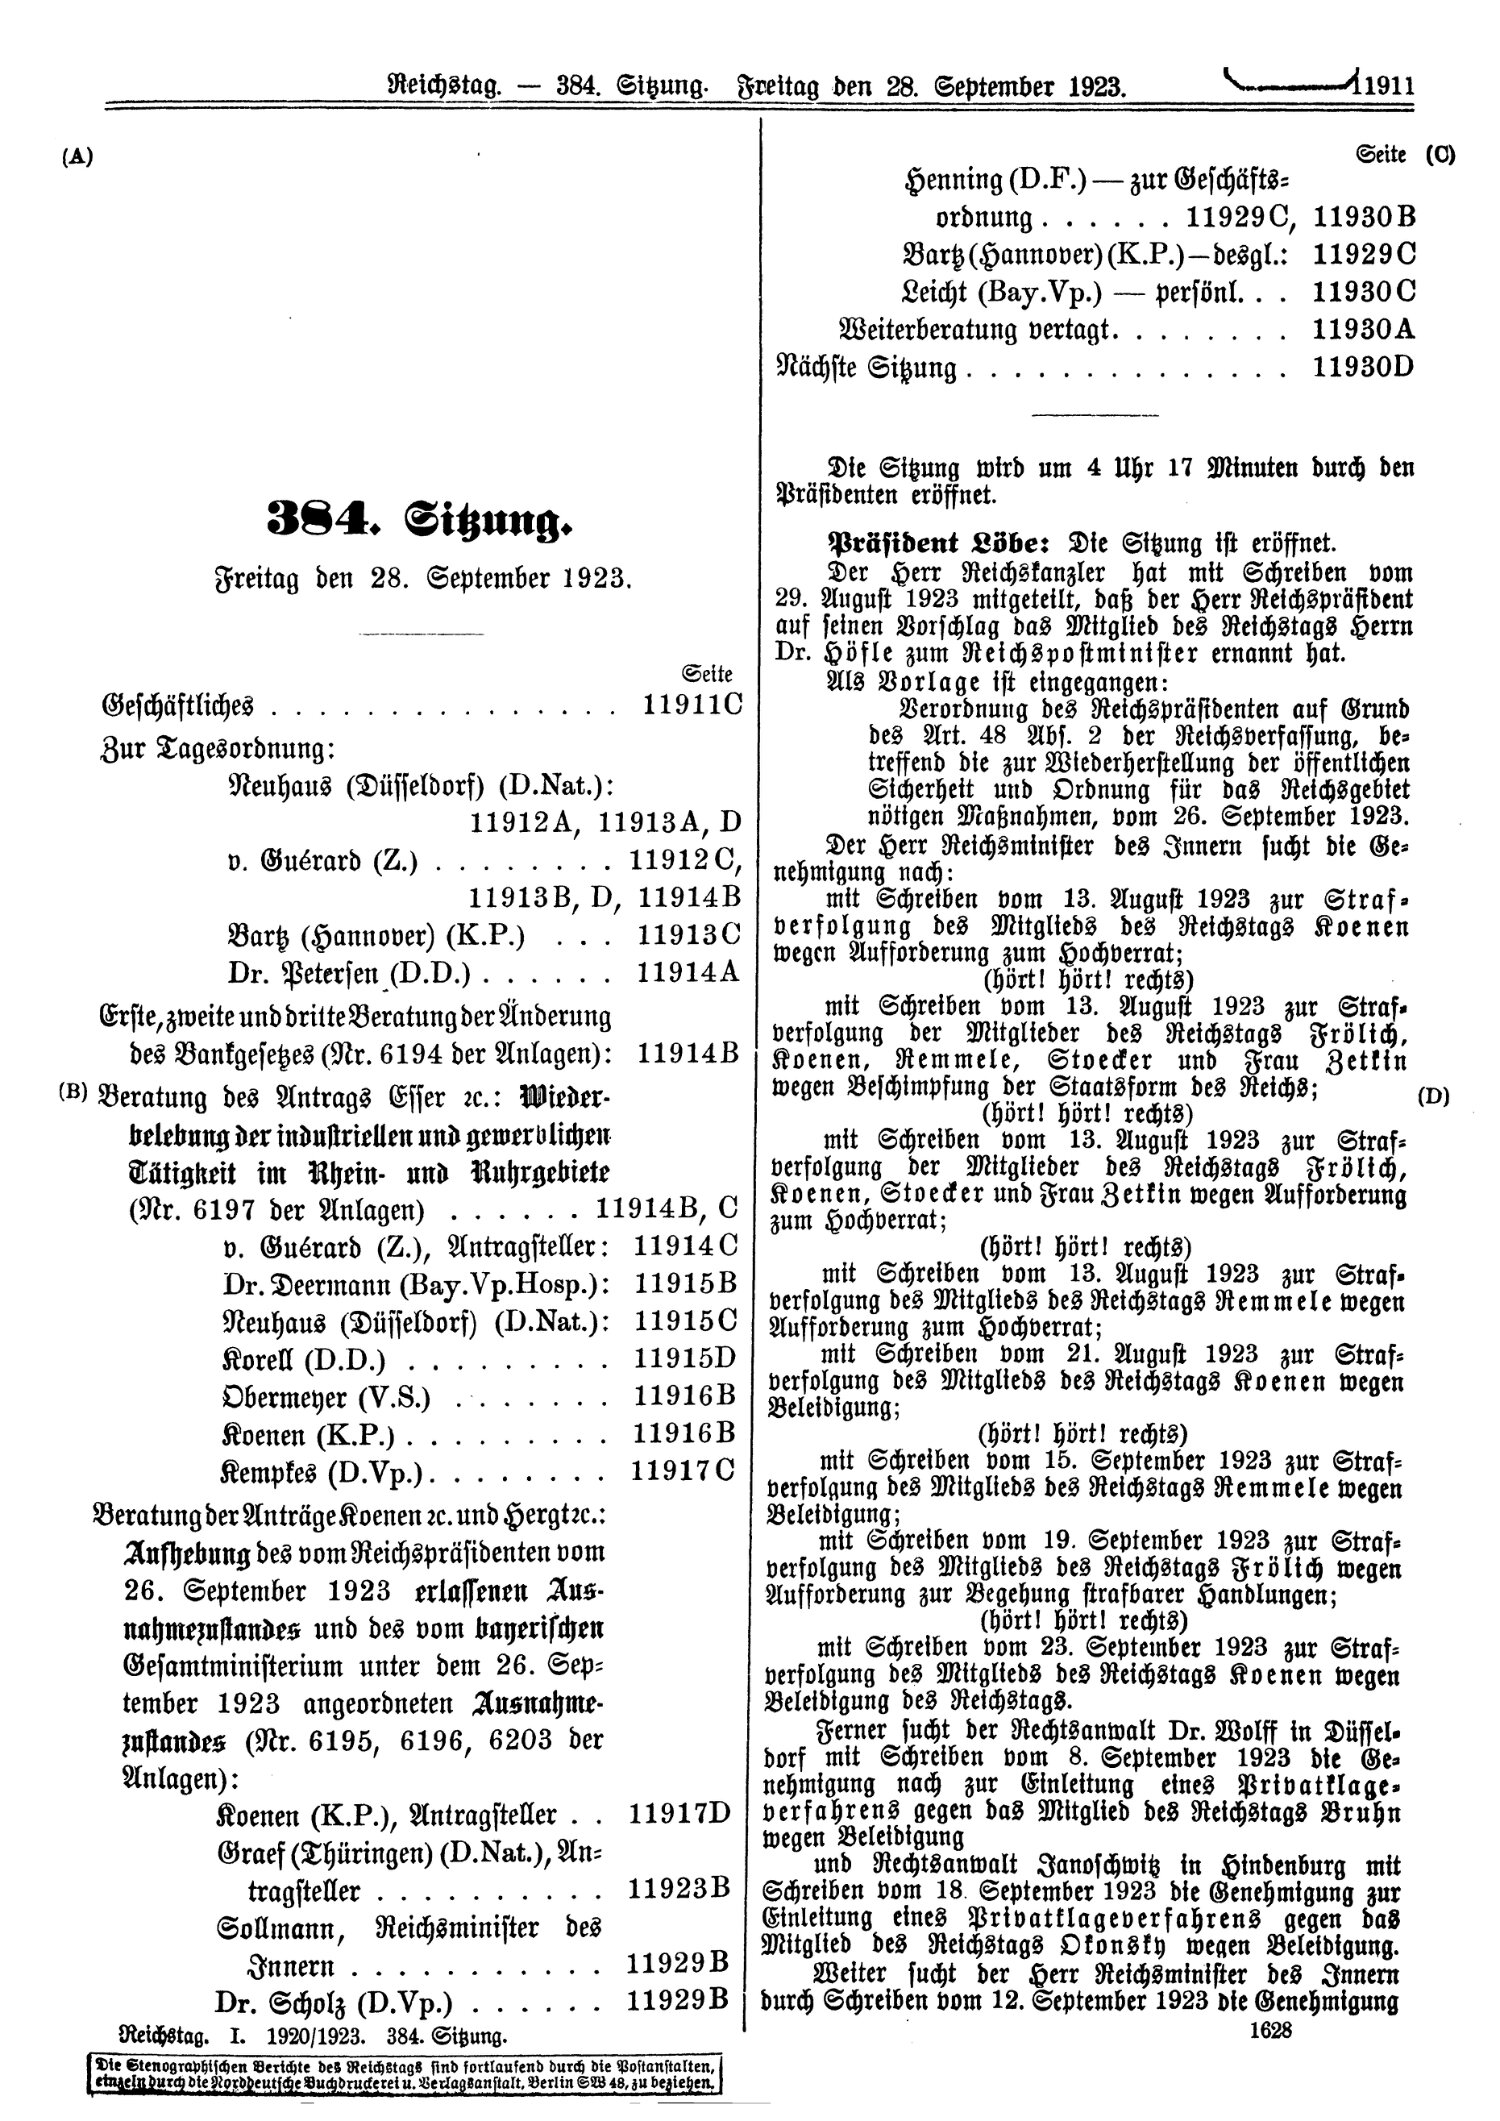 Scan of page 11911